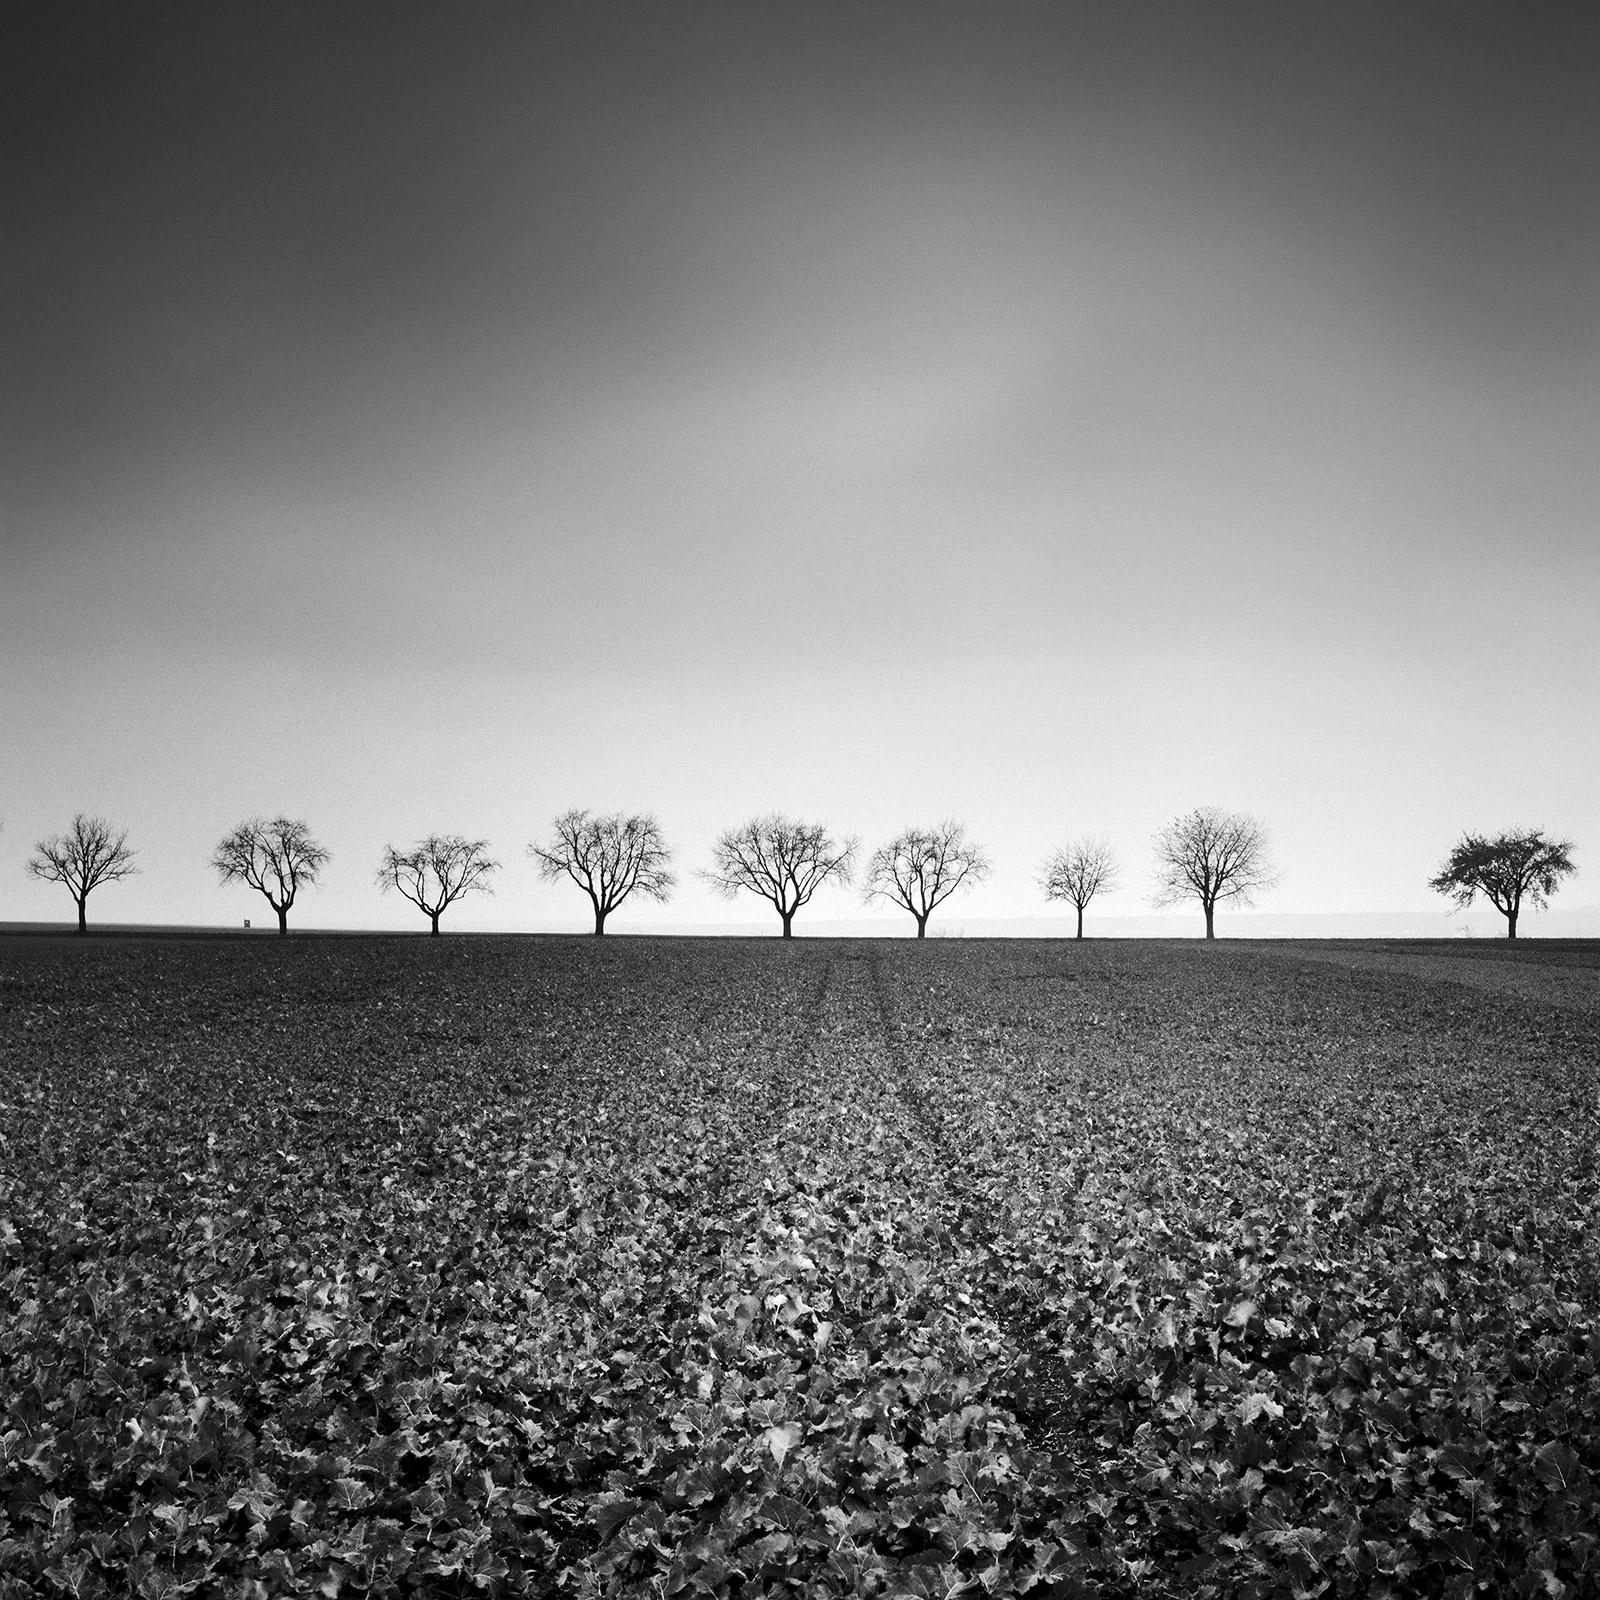 Gerald Berghammer Black and White Photograph - Nine Cherry Trees, Avenue, Austria, black and white landscape photography